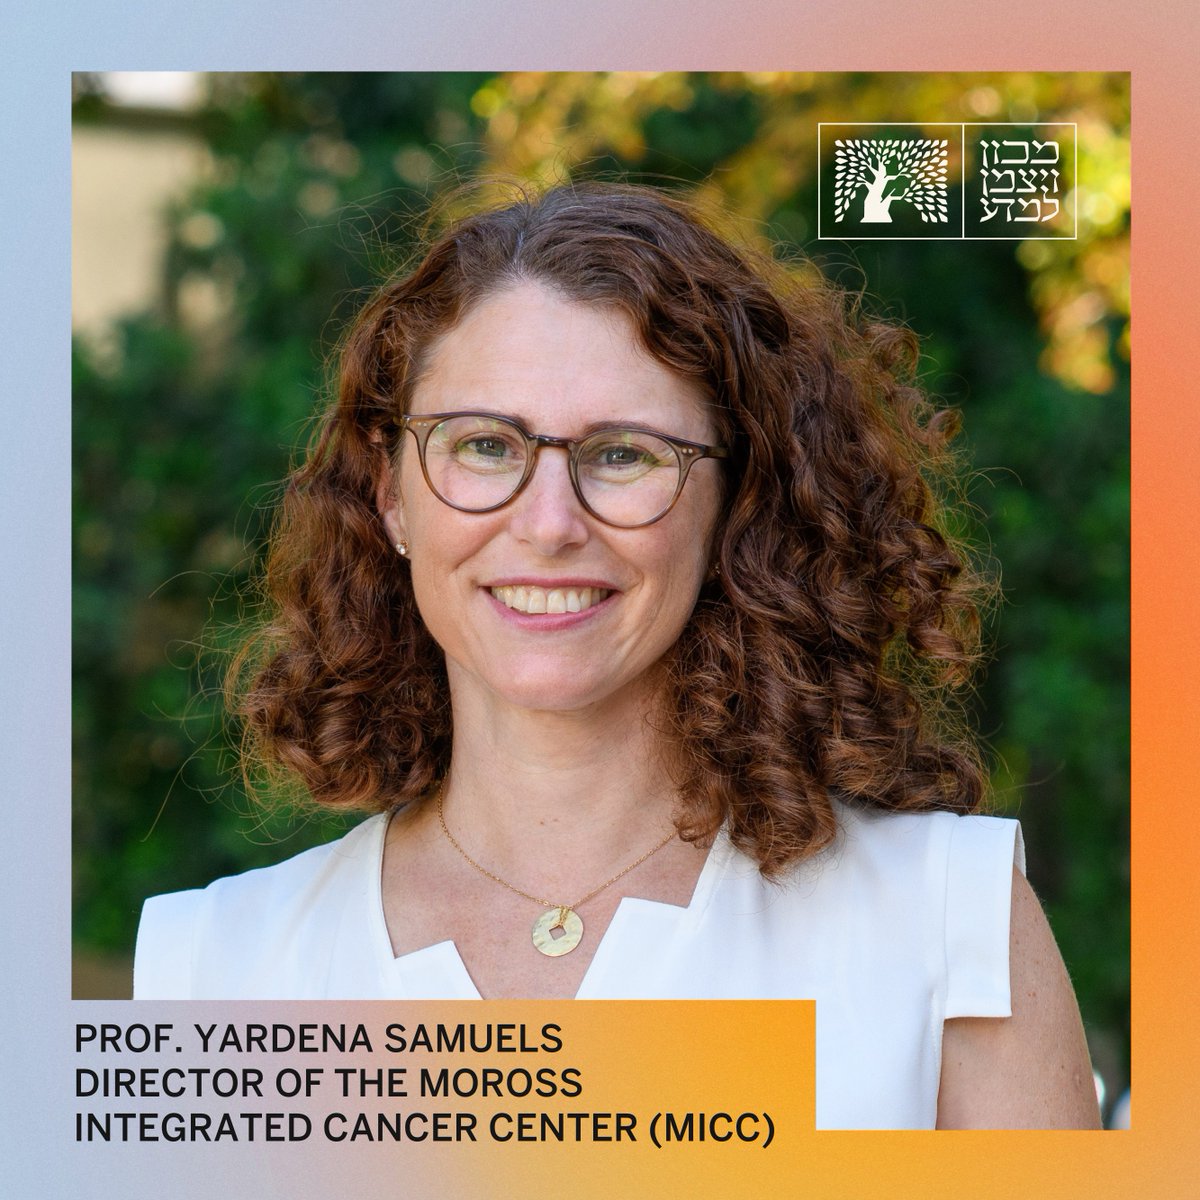 Congratulations to Prof. @samuels_yardena of the Department of Molecular Cell Biology, for her appointment as Director of the Moross Integrated Cancer Center (MICC).